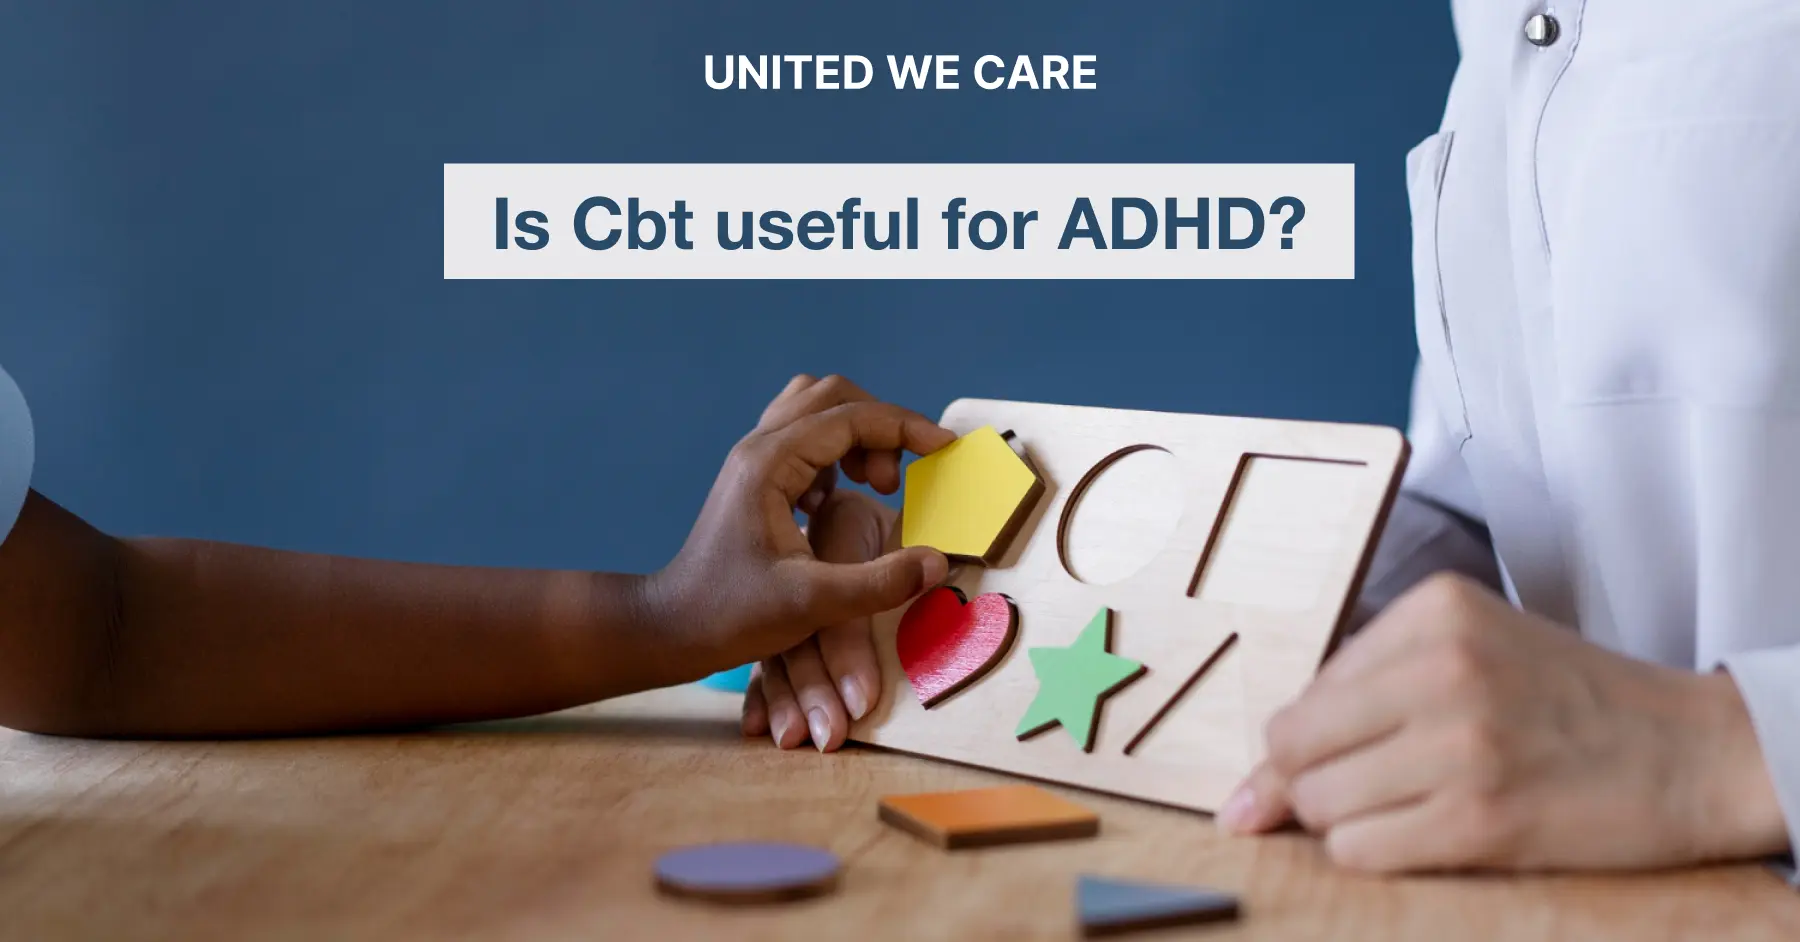 CBT for ADHD: Effective Strategies to Deal With ADHD